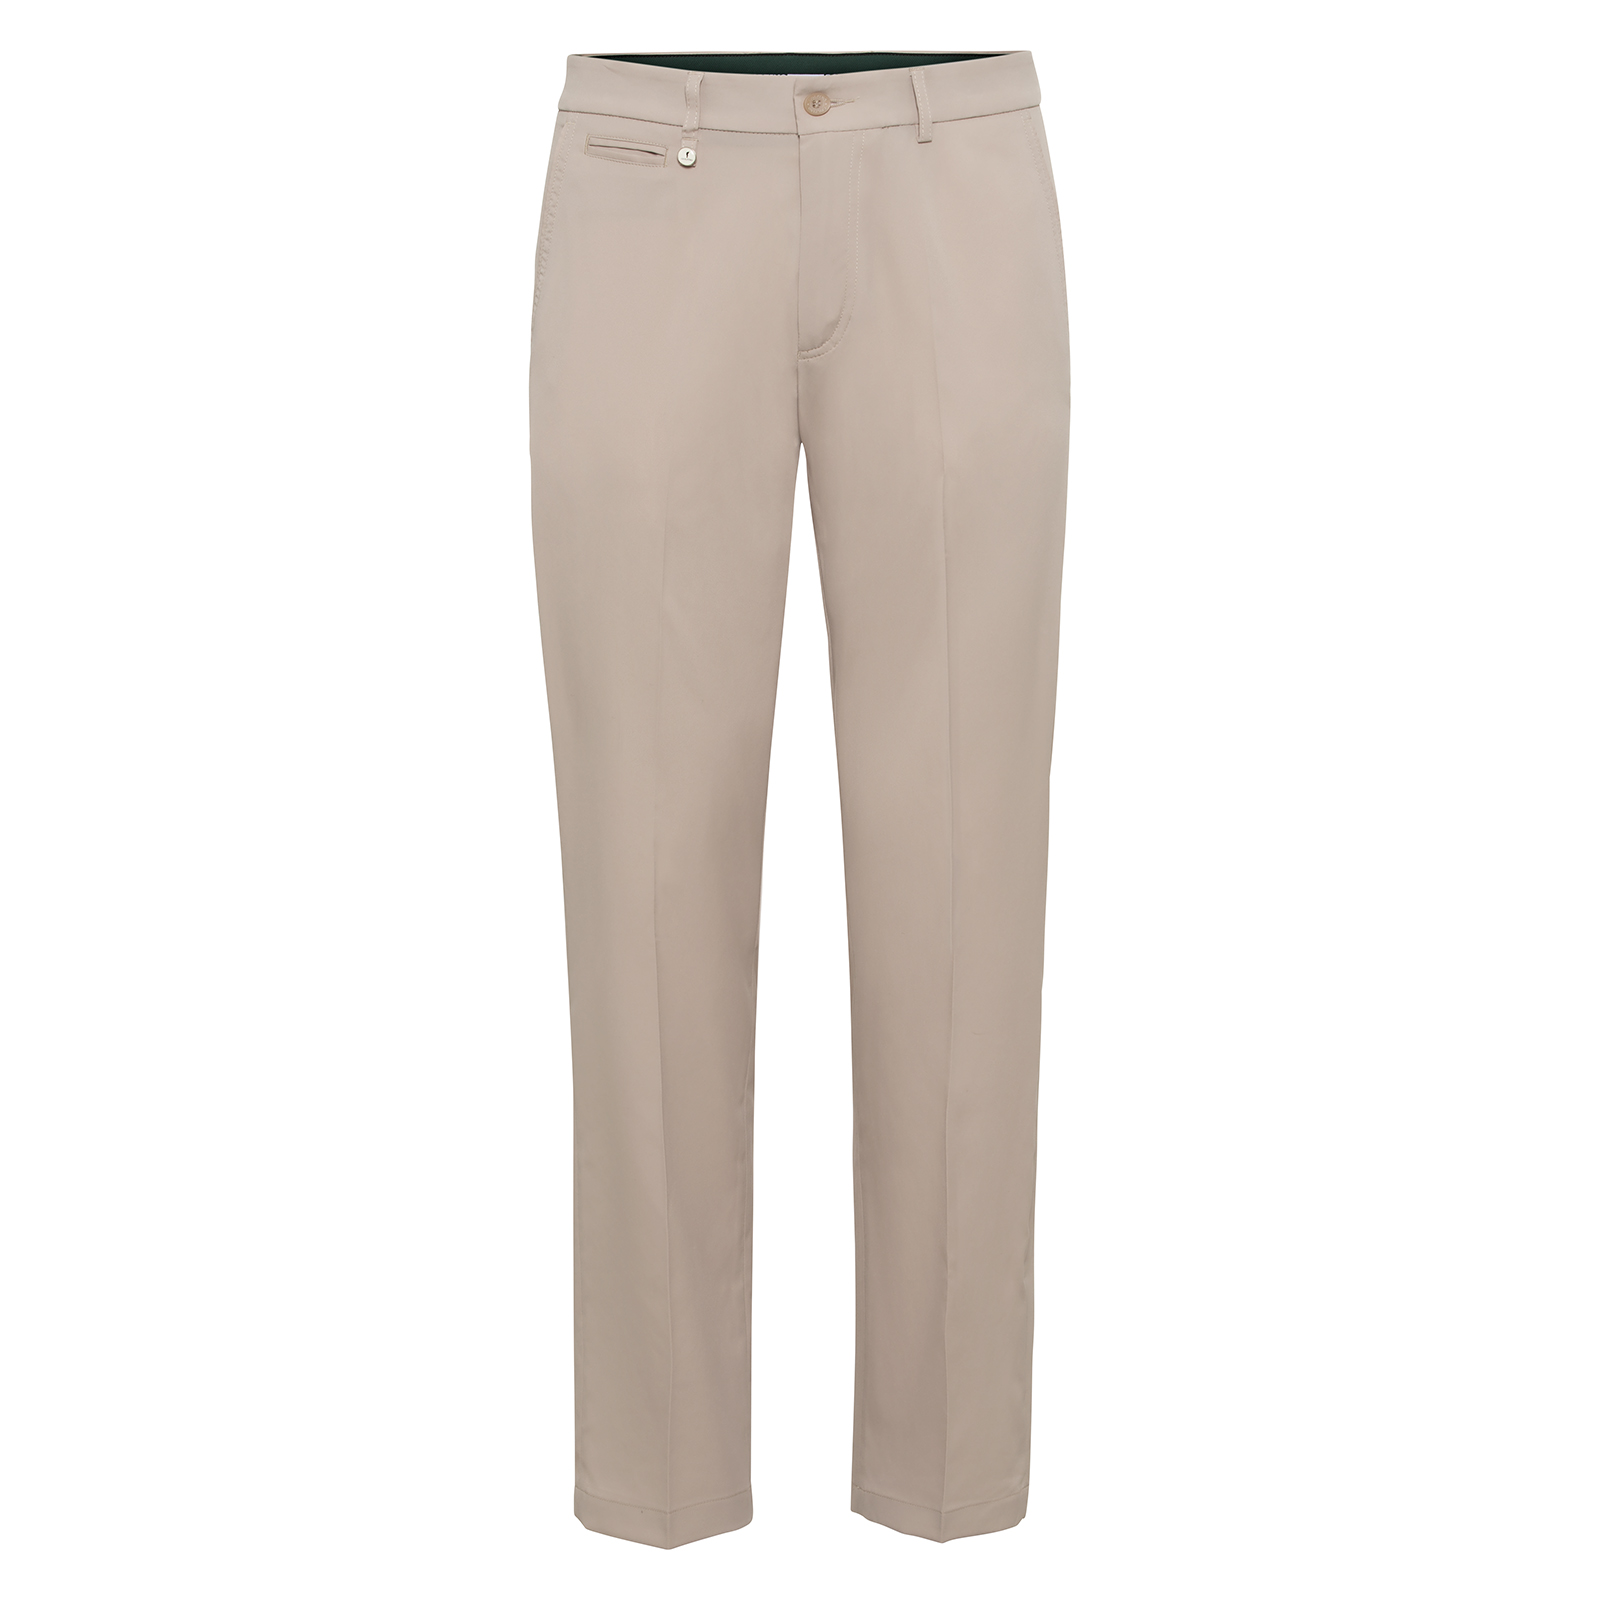 Men's quick dry golf trousers with good breathing properties